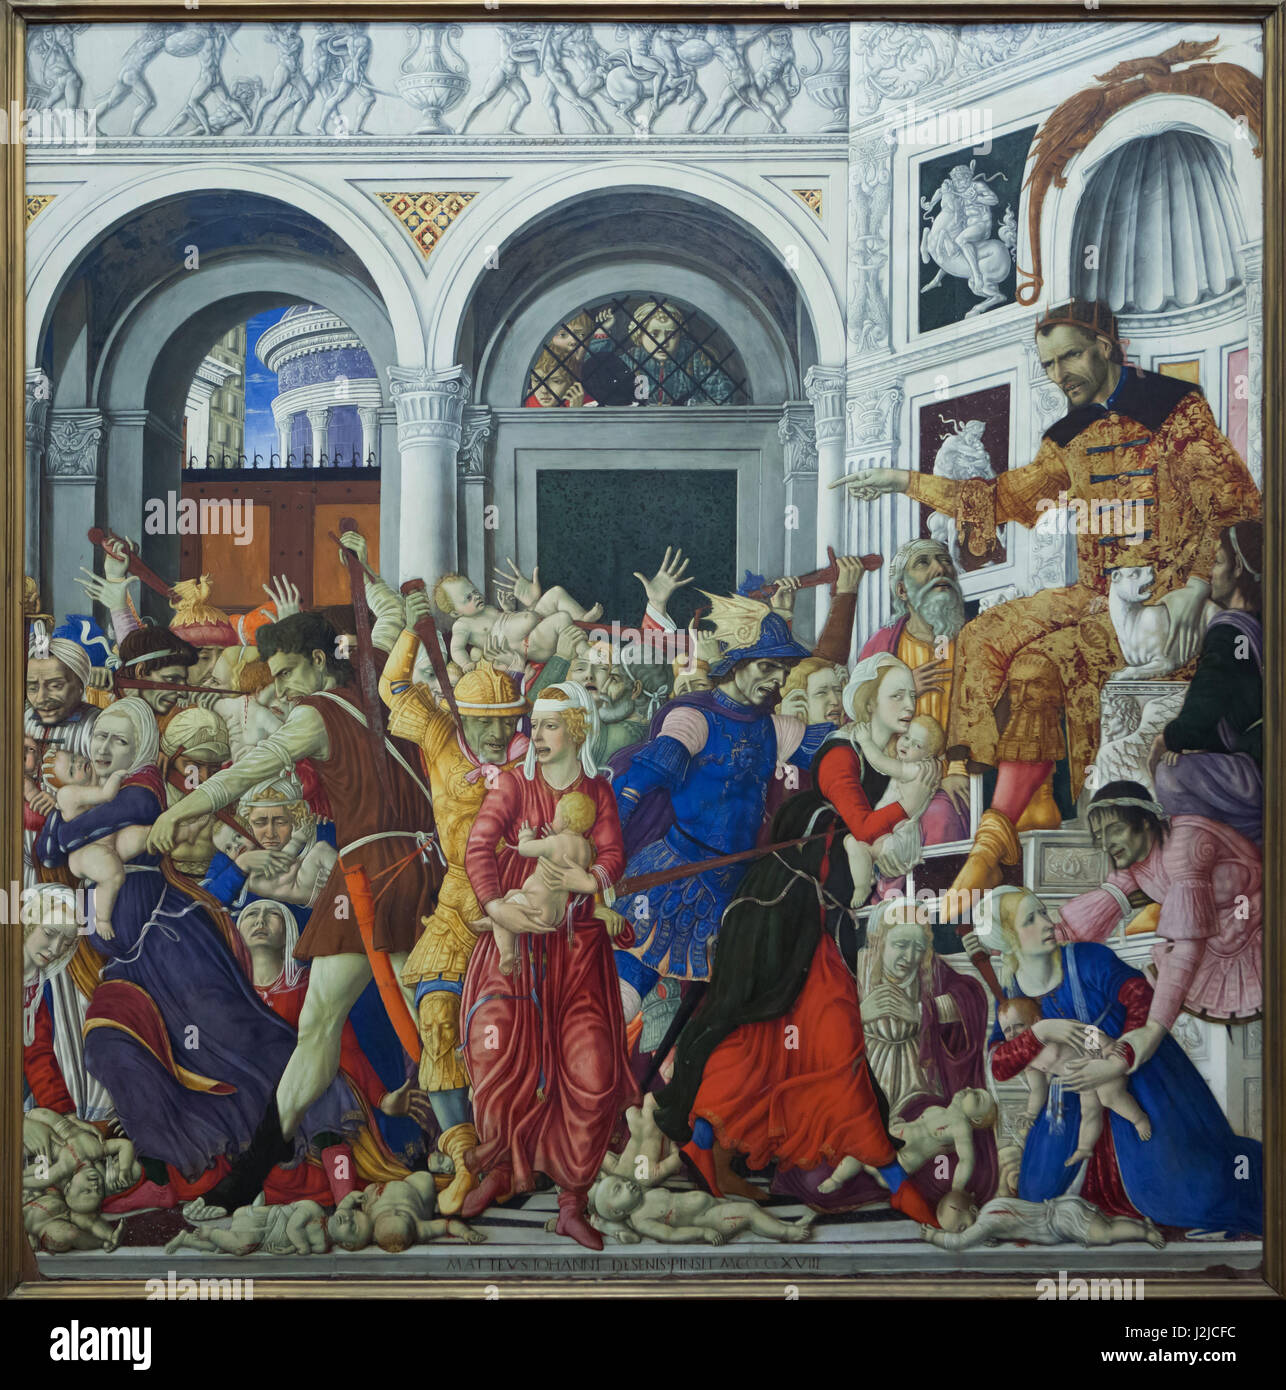 Painting 'Massacre of the Innocents' by Italian Renaissance painter Matteo di Giovanni (1481-1488) on display in the Museo di Capodimonte in Naples, Campania, Italy. Stock Photo